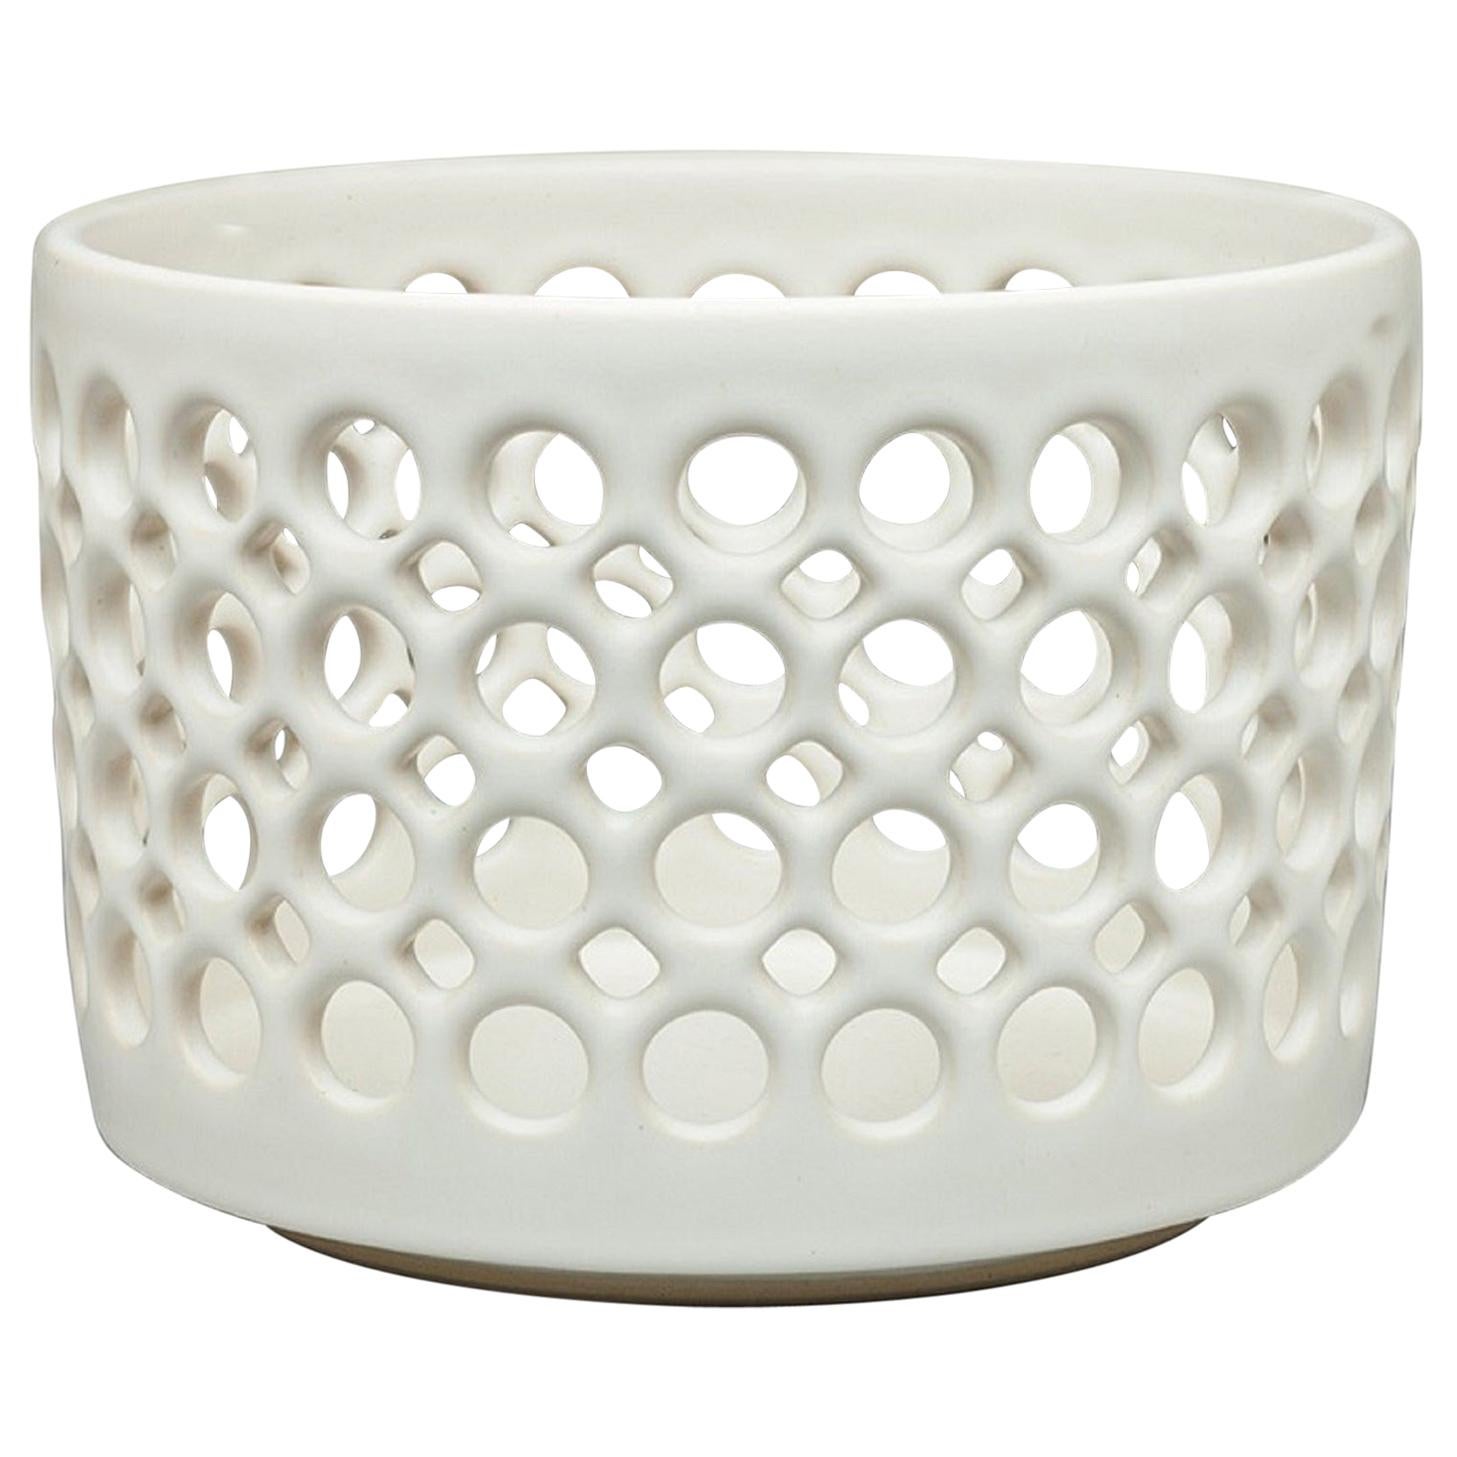 Pierced White Cylindrical Bowl, in Stock